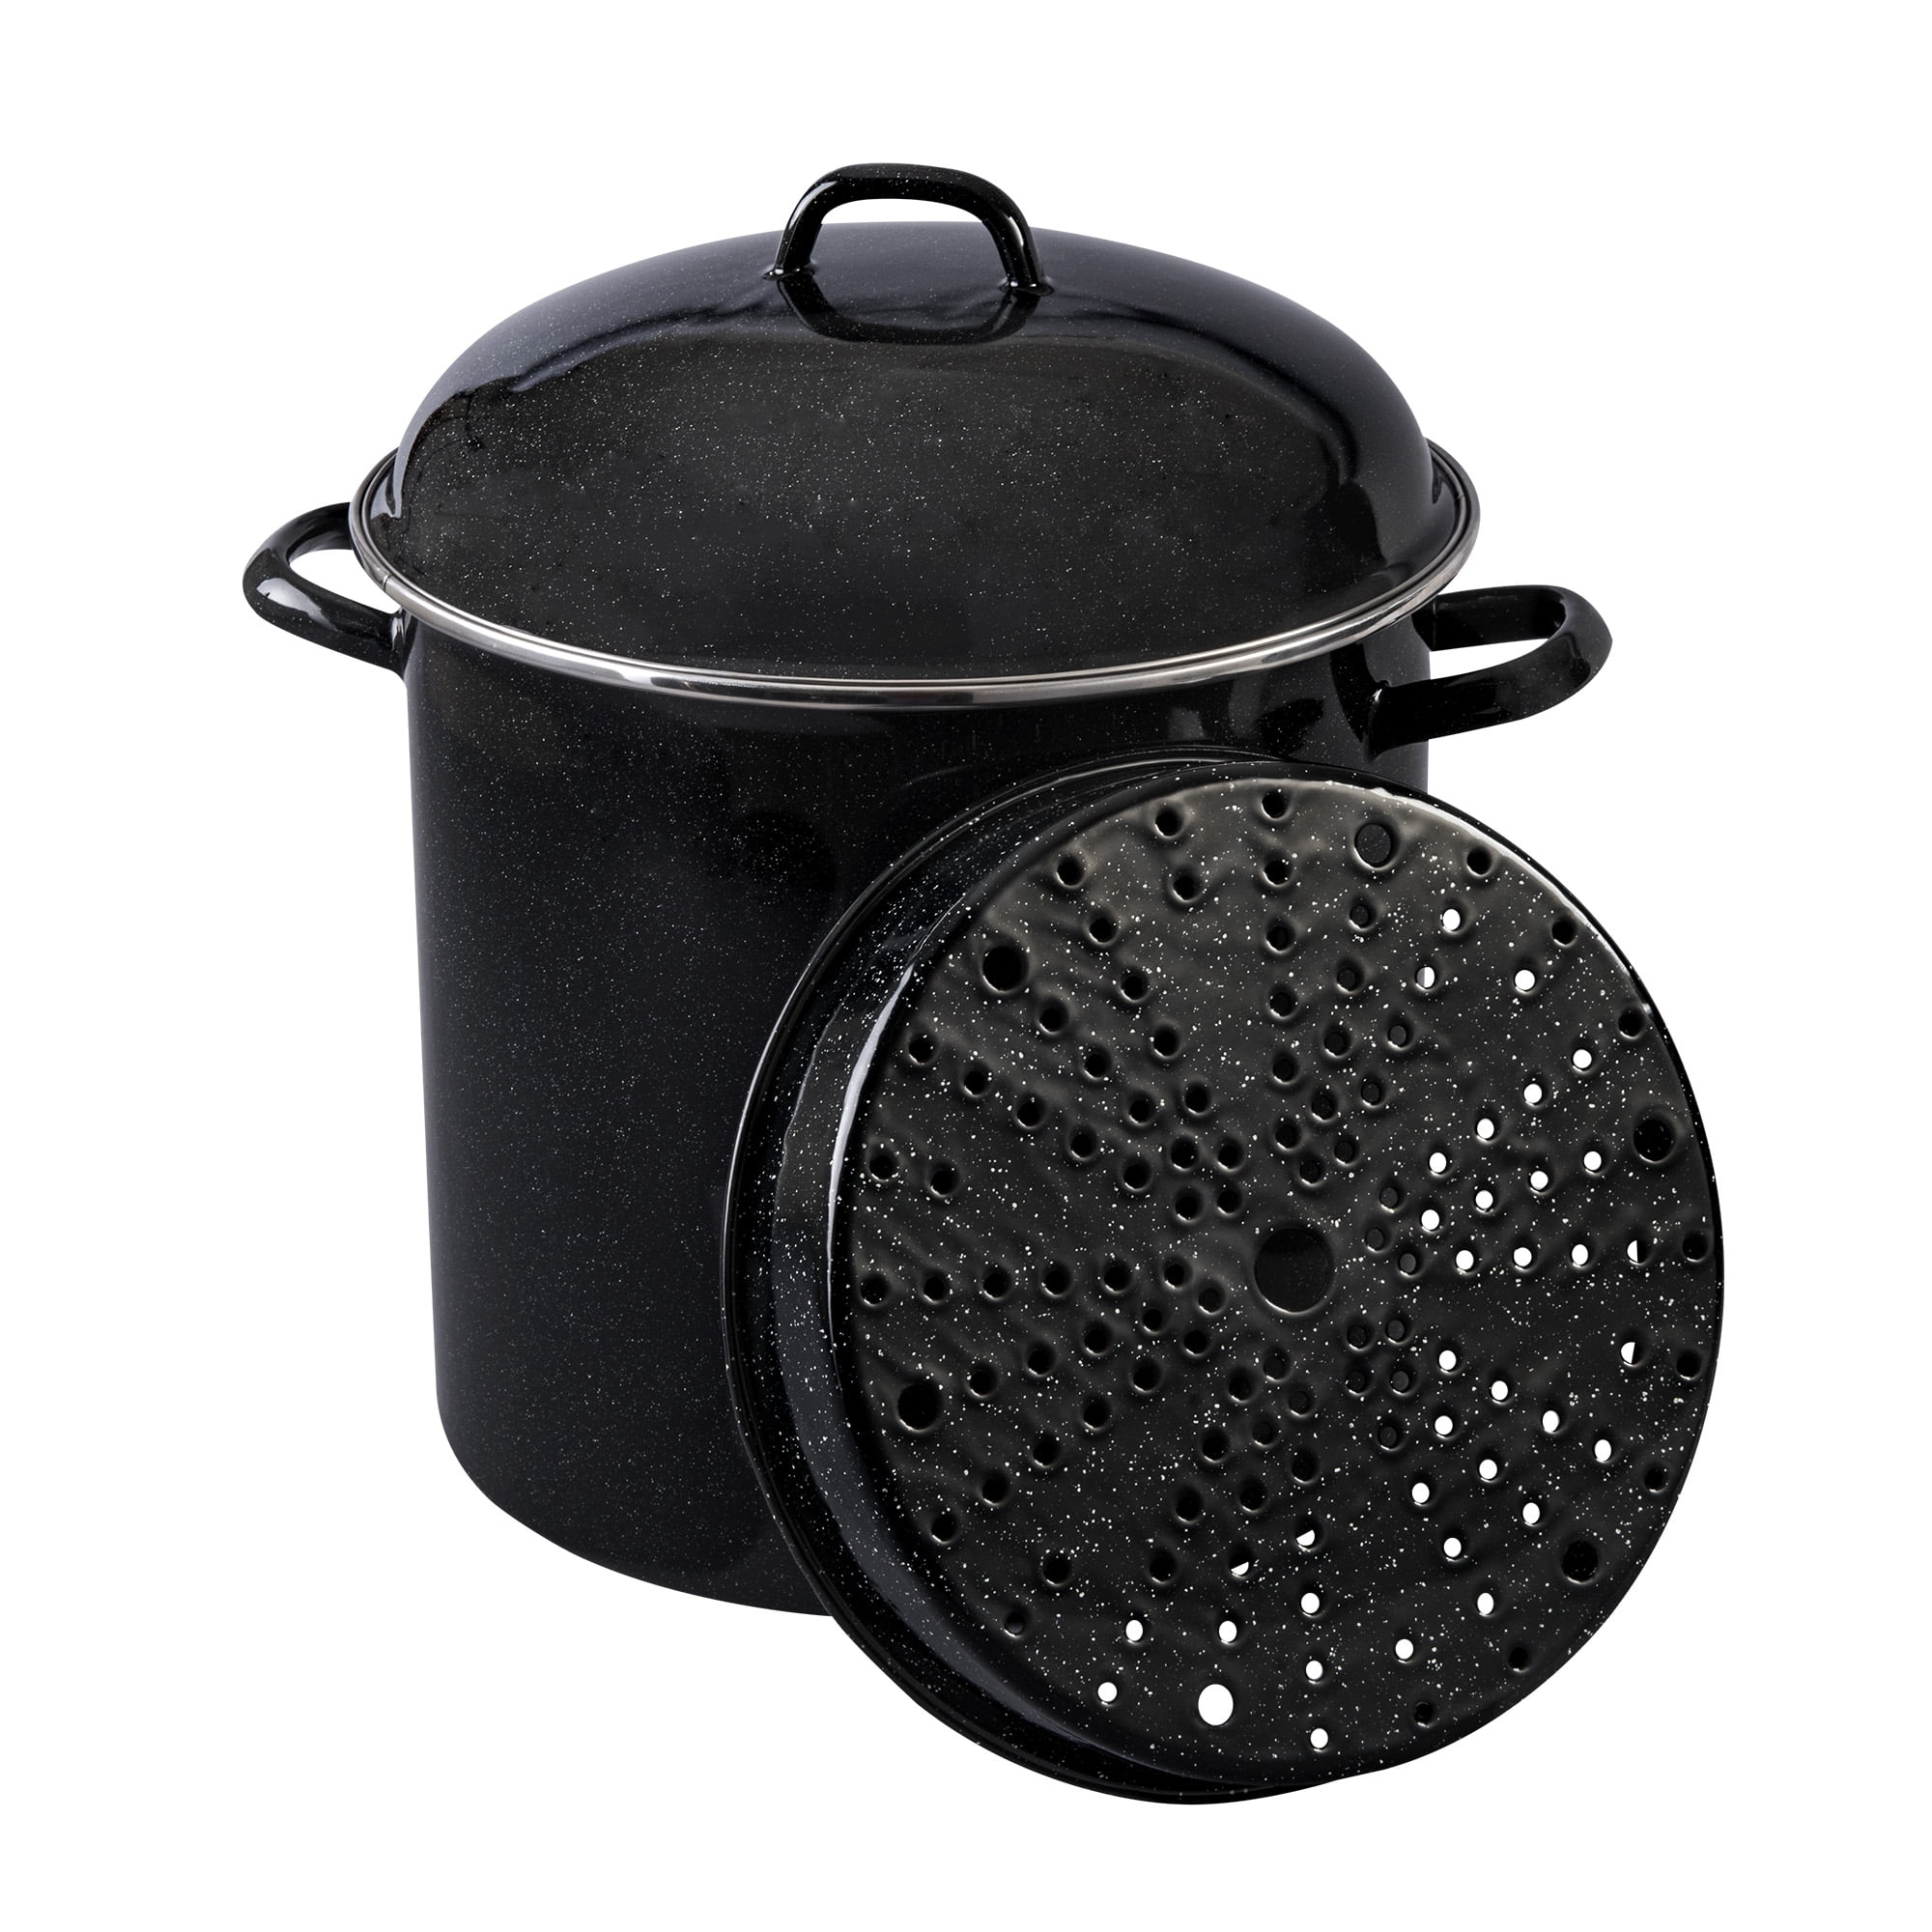 Granite Ware 15.5 Qt Steamer with Lid. Enameled steel perfect for seafood,  soups or sauces.